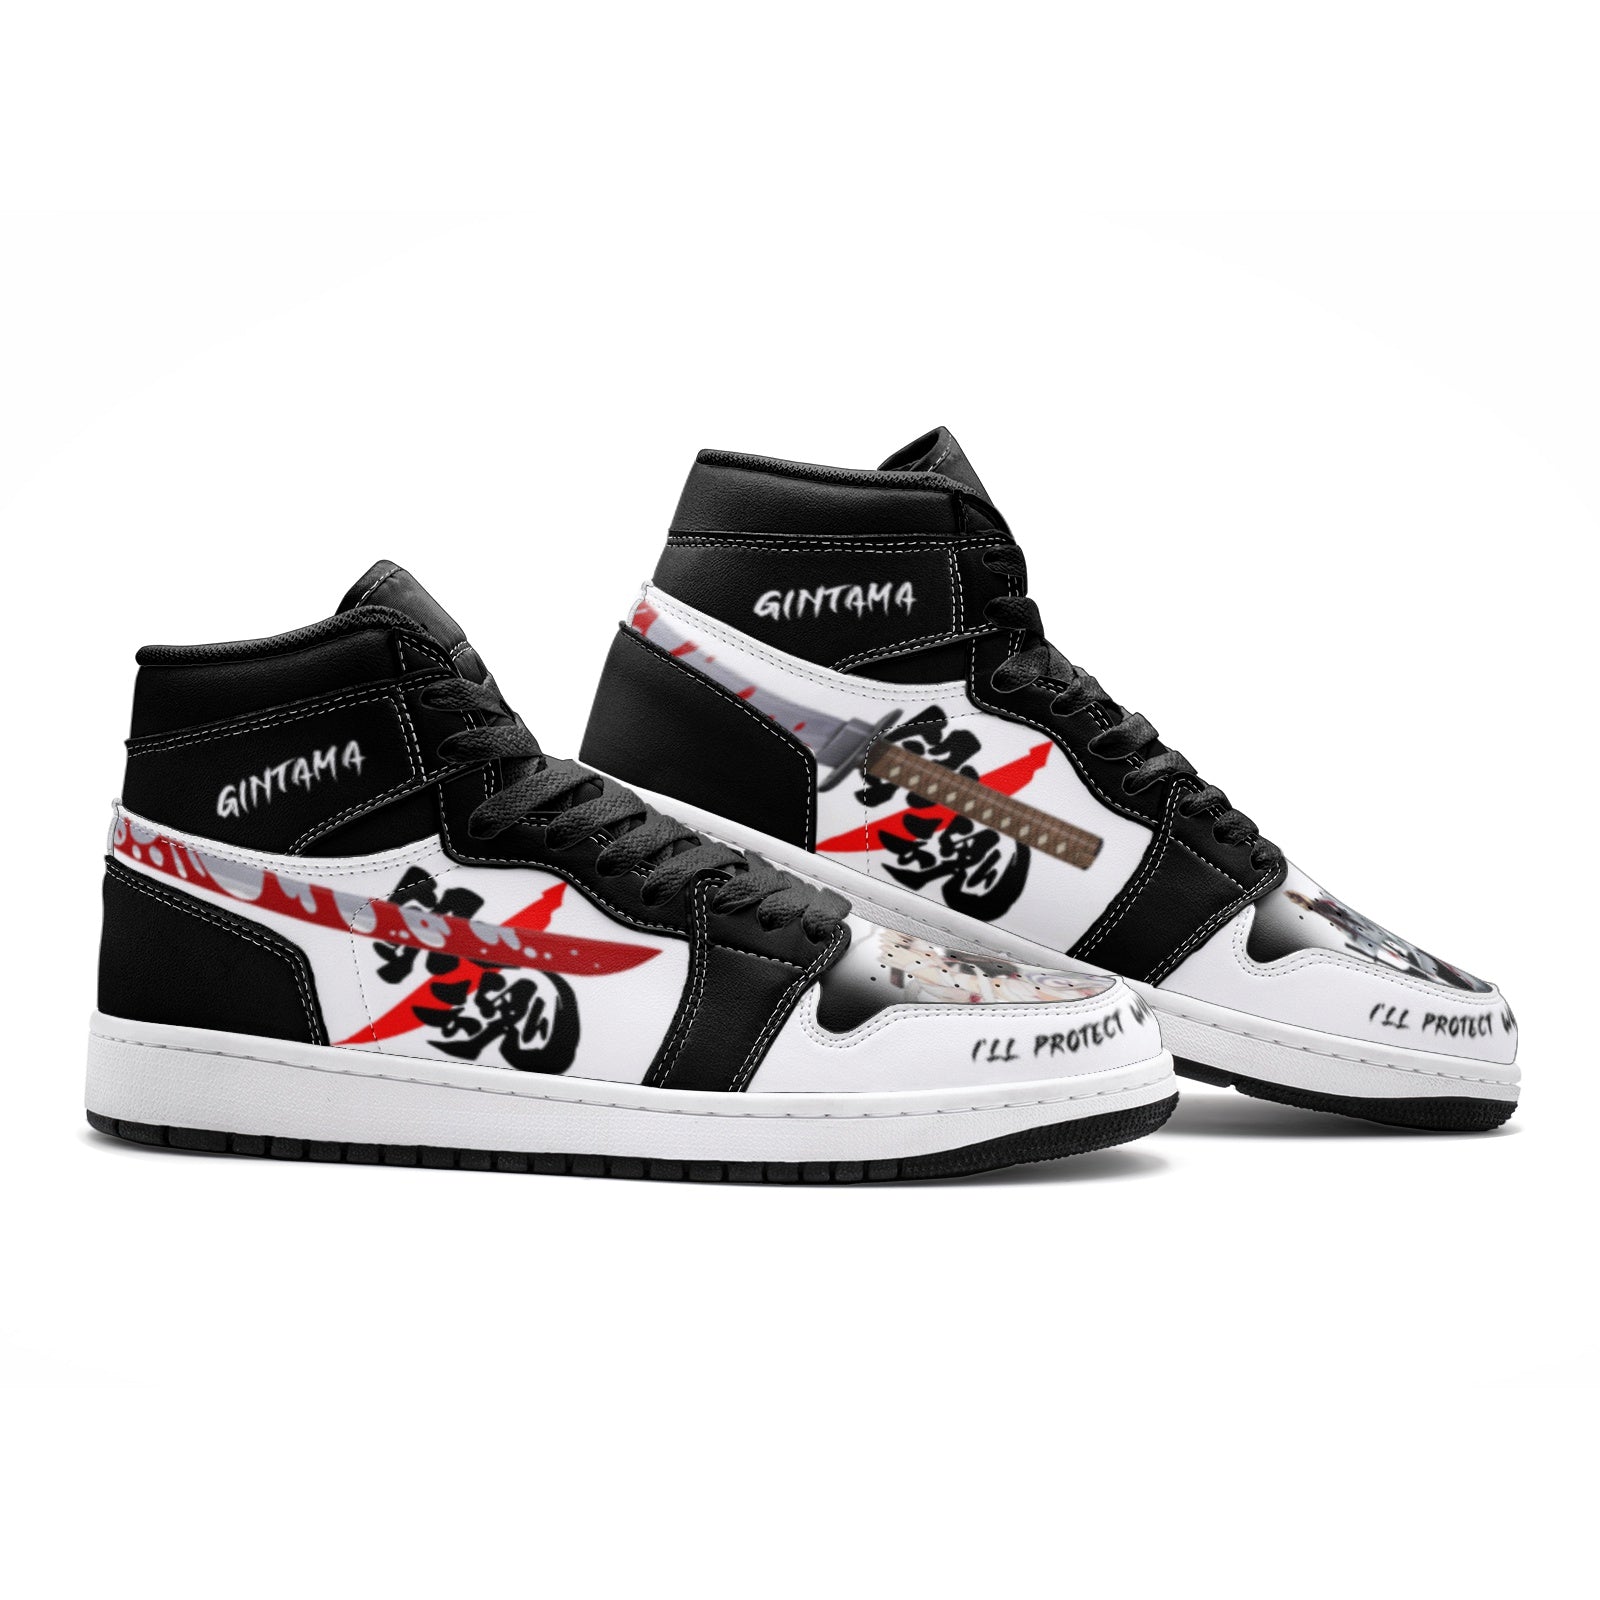 I'll Protect What I Want to Gintama JD1 Shoes-3 Men / 4.5 Women-White-Anime Shoe Shop